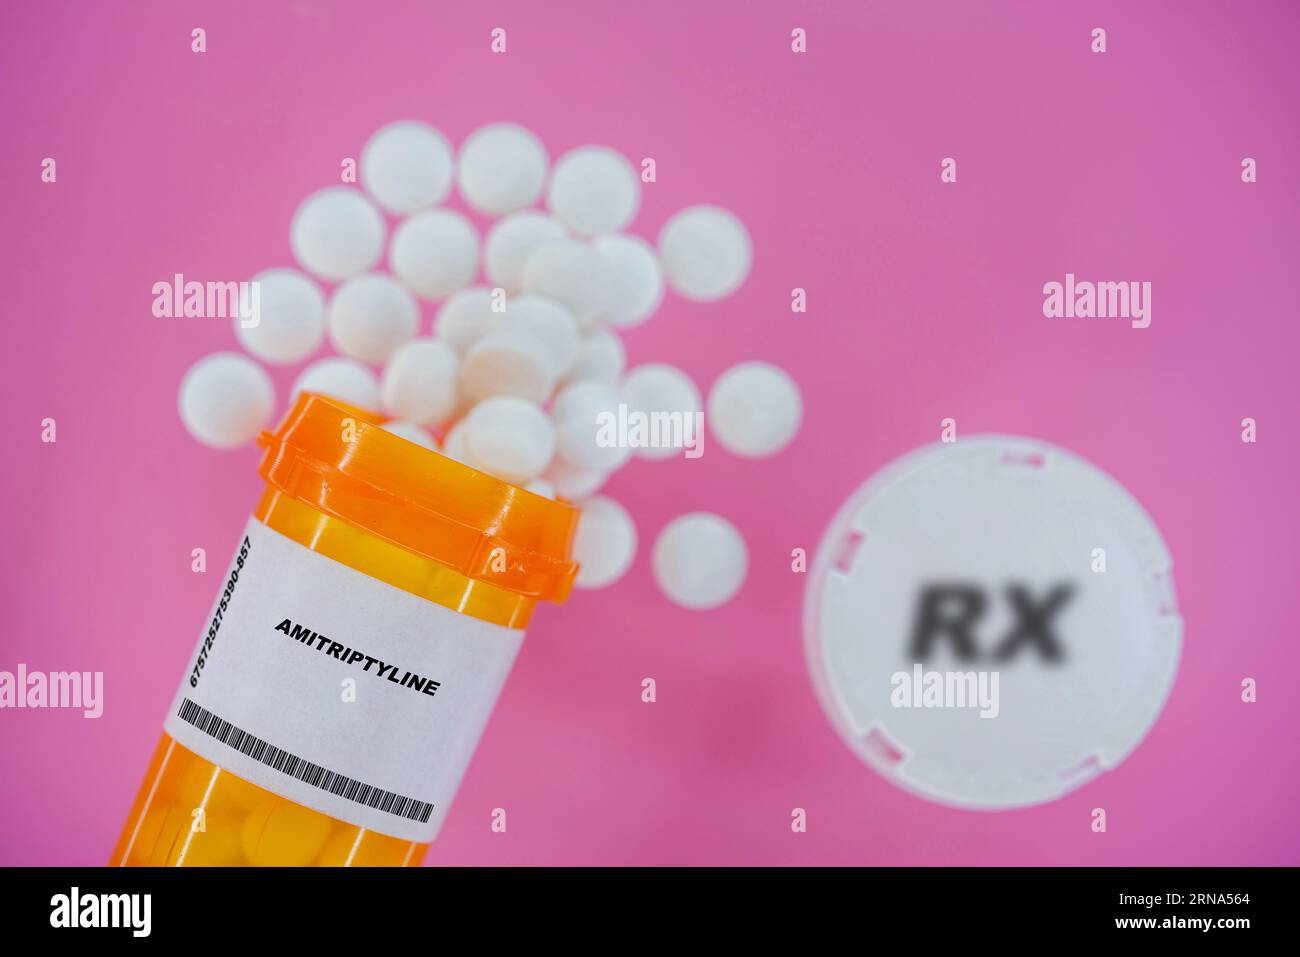 Amitriptyline Rx medicine pills in plactic vial with tablets. Pills spilling   from yellow container on pink background. Stock Photo